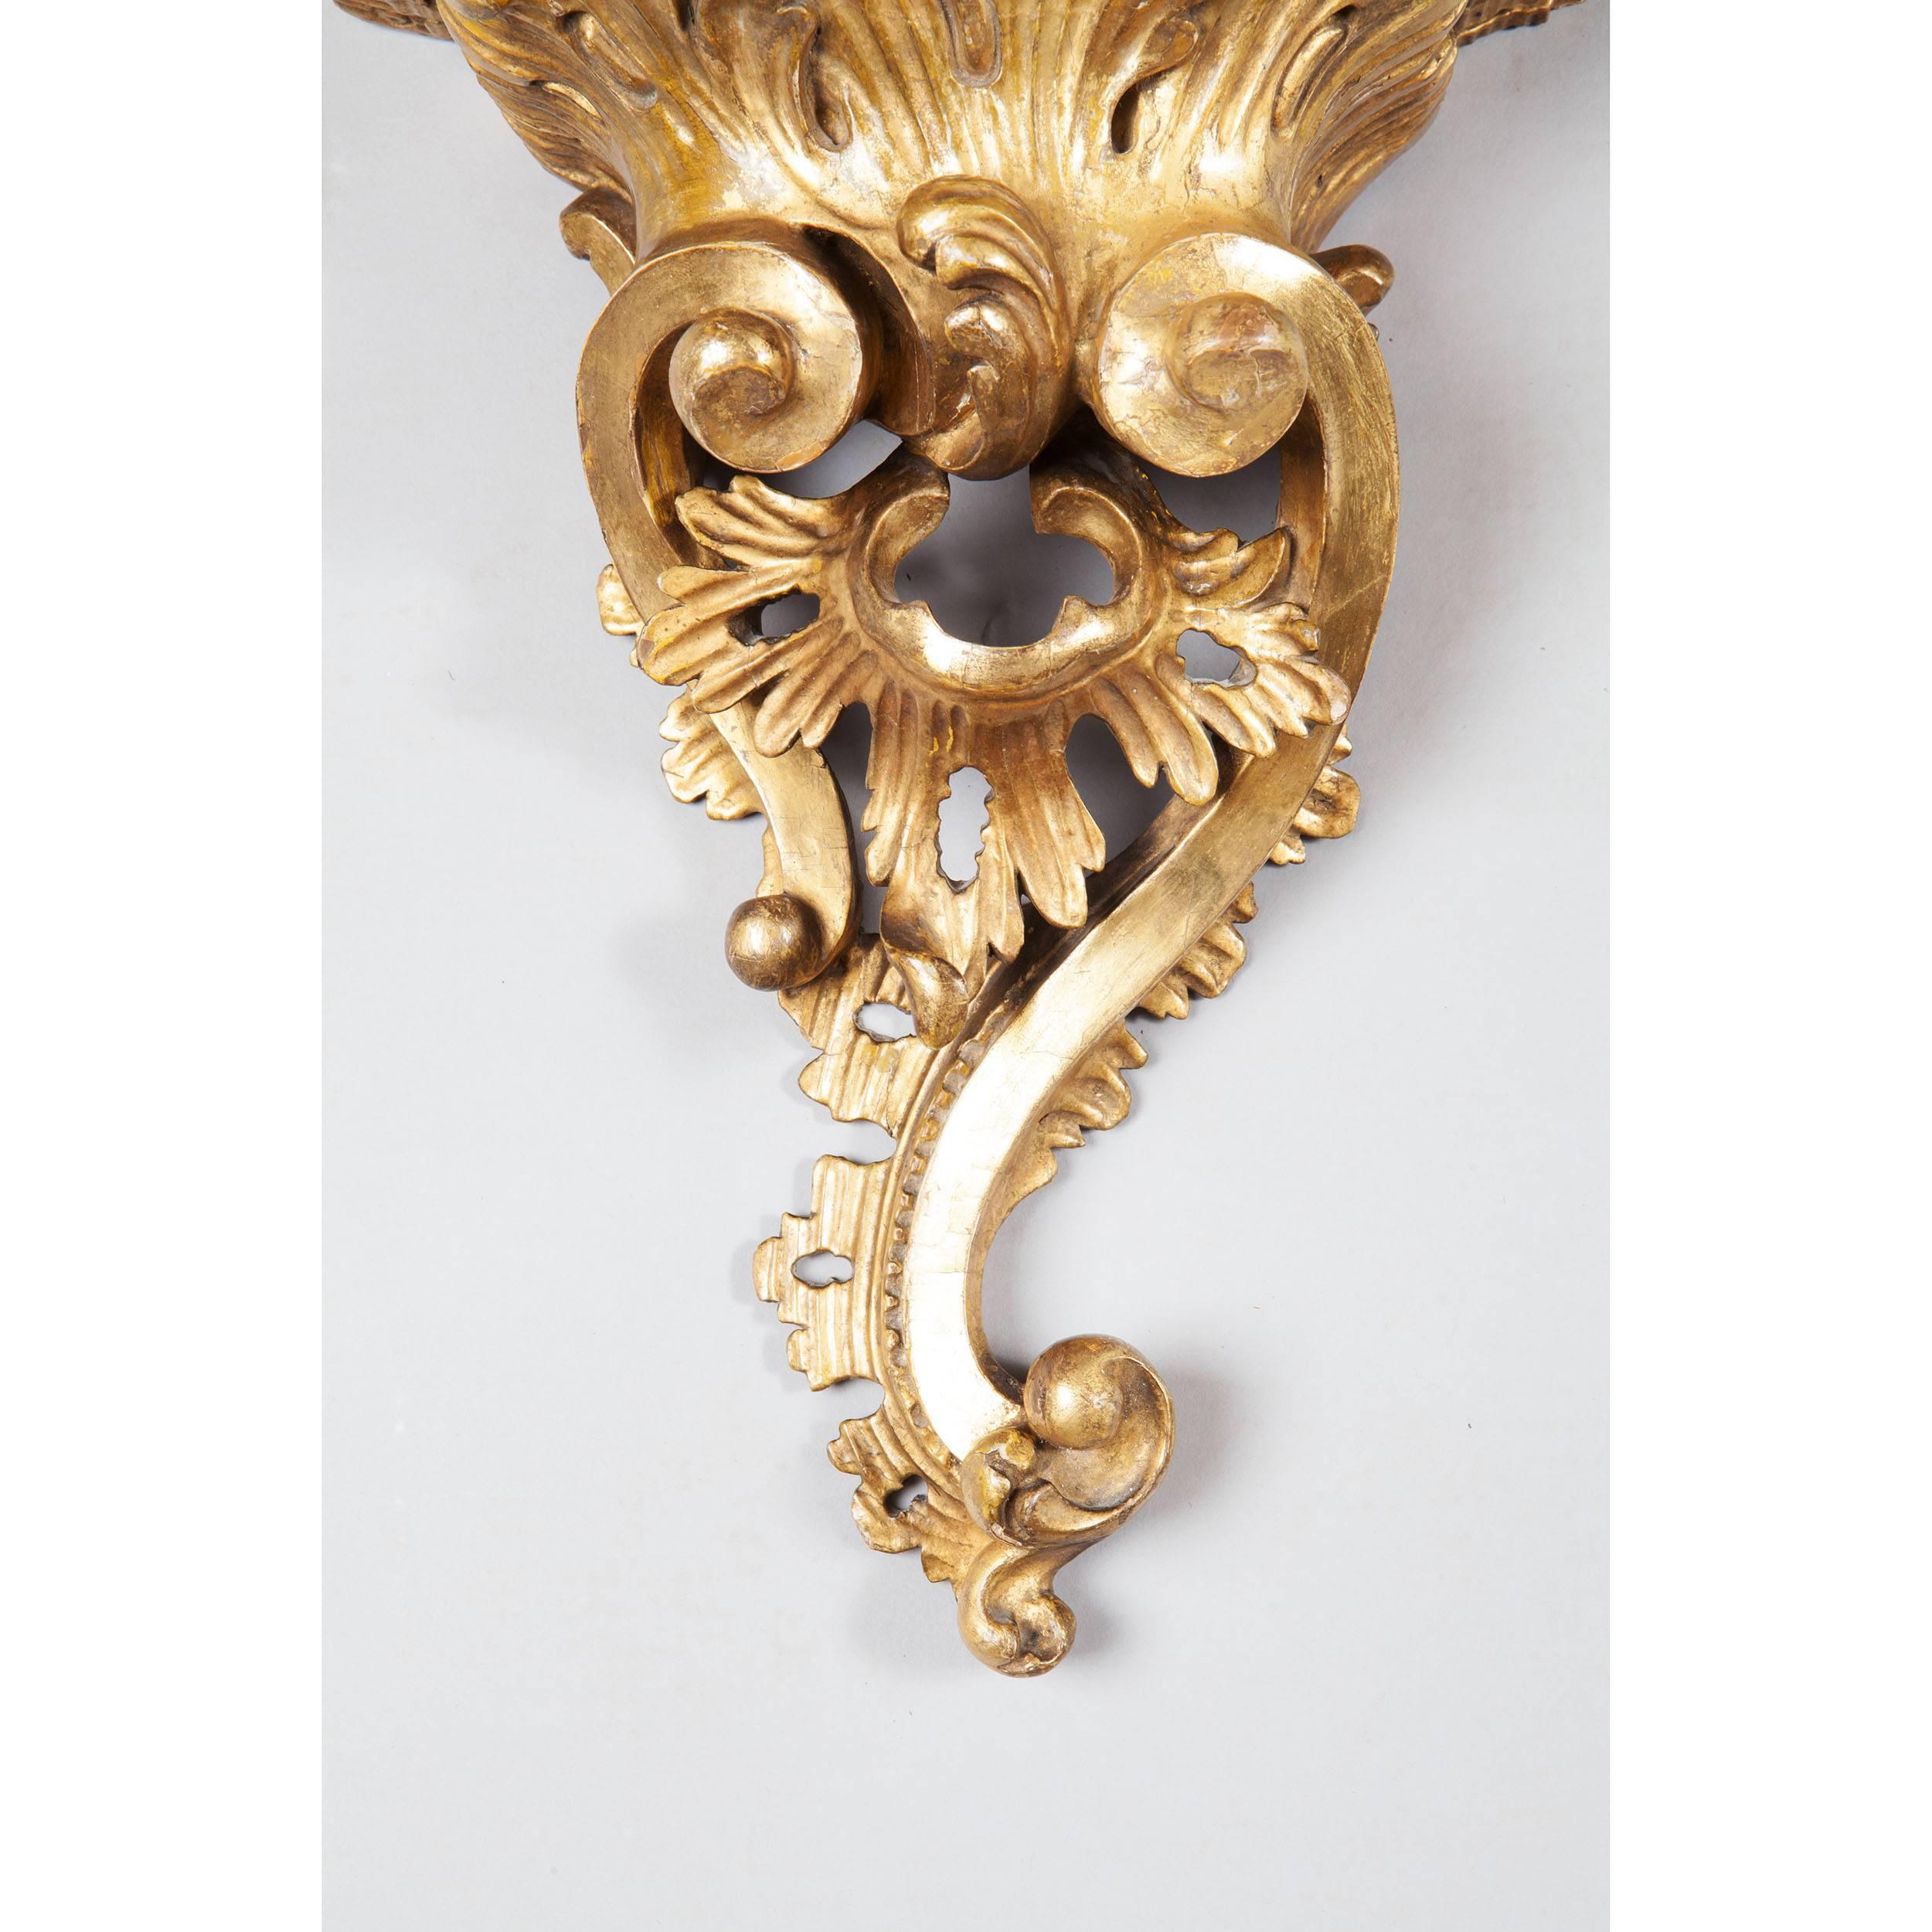 A fine mid 18th-century George III giltwood Rococo wall bracket, with asymmetrical scrolling detail and pierced foliage. 

Measures: Height 14 inches,
width 10 inches,
​depth 6 1/2inches.